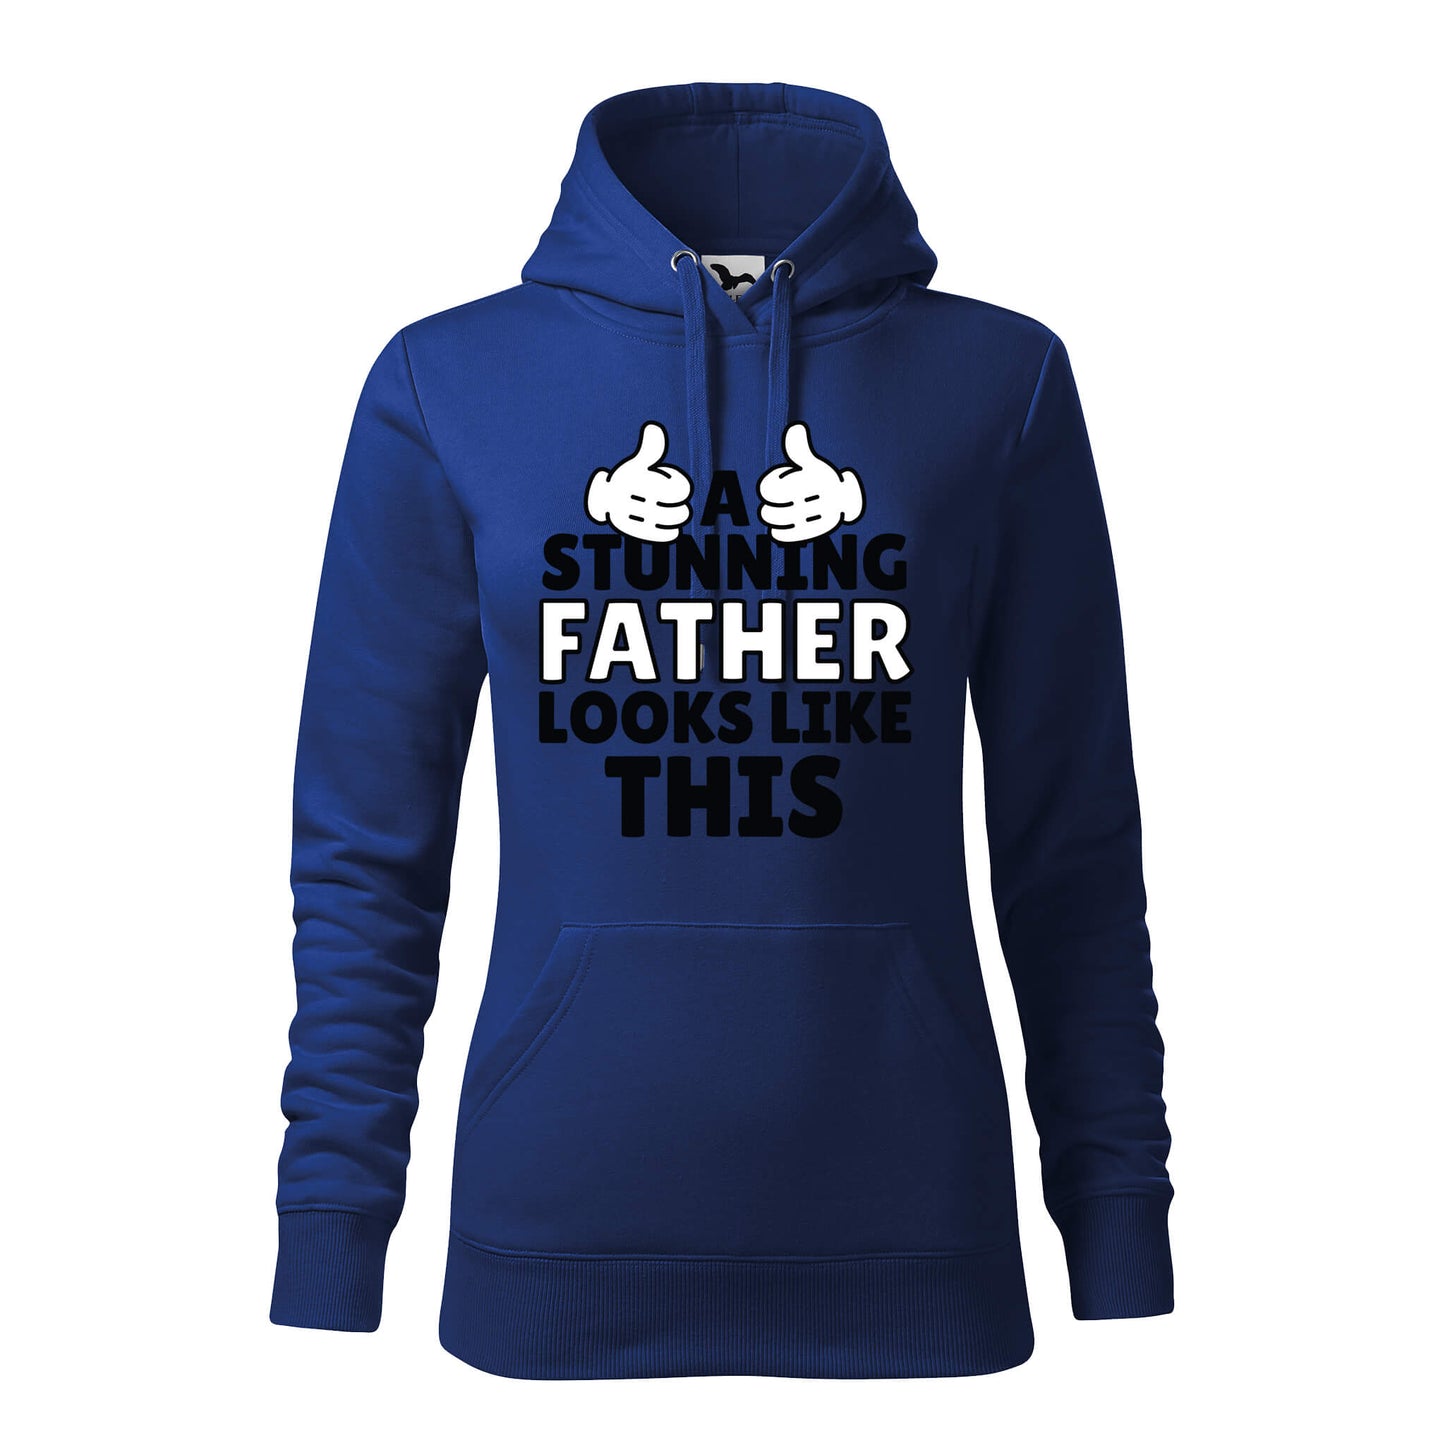 Stunning father looks like this hoodie - rvdesignprint